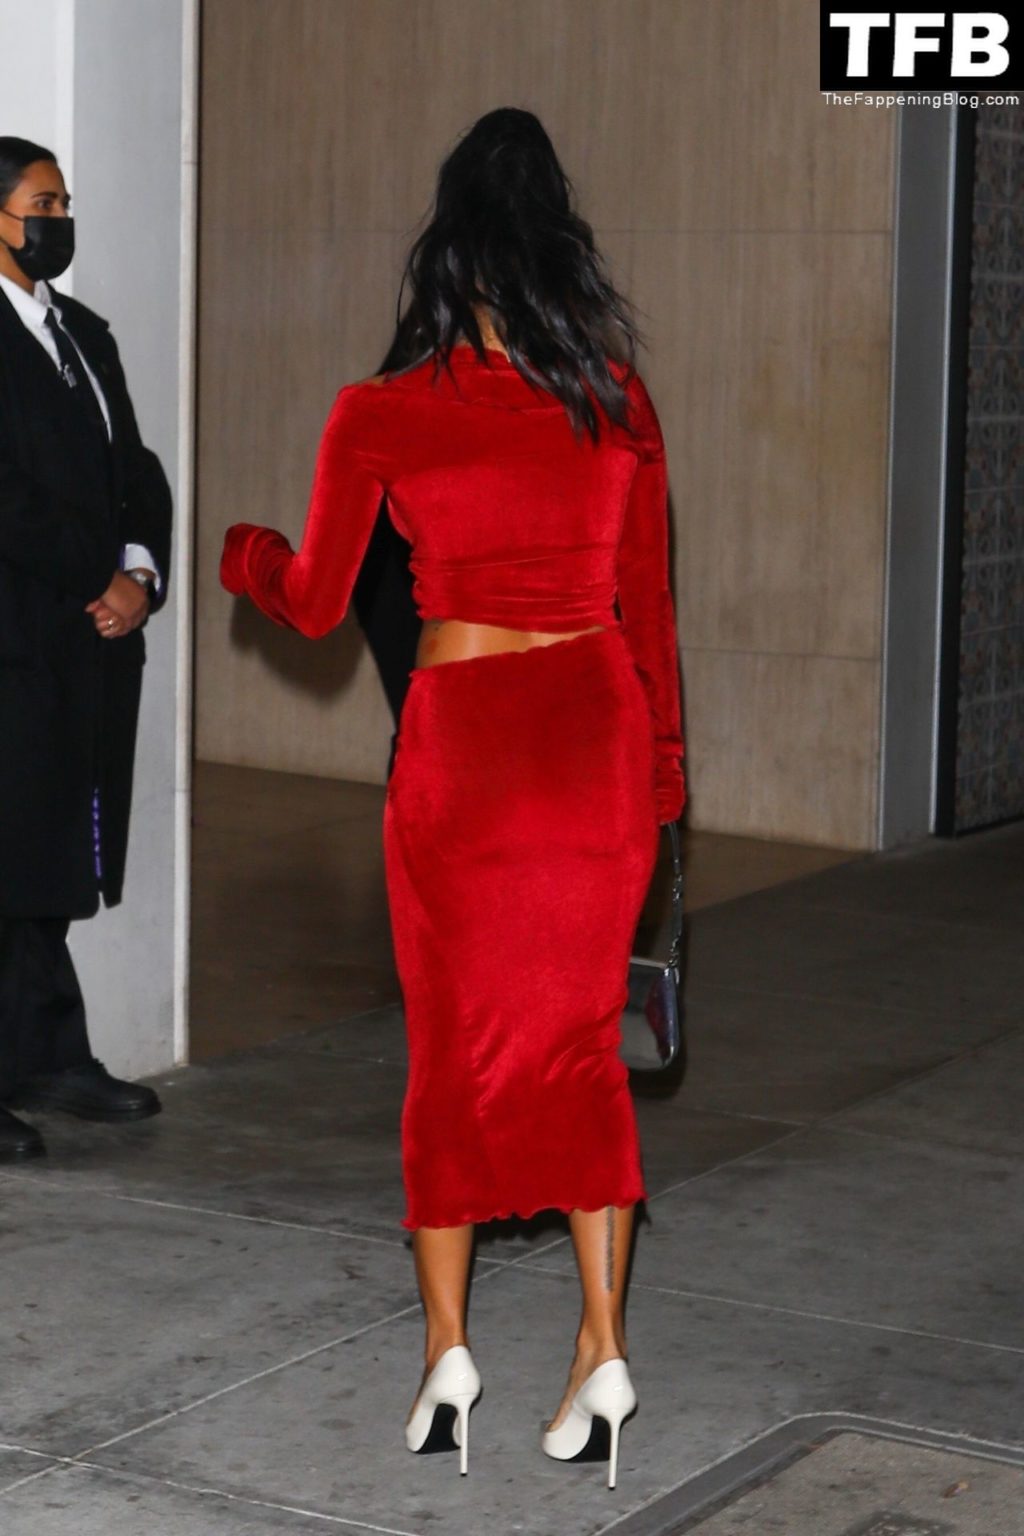 Karrueche Tran Shows Her Pokies in a Red Dress at The Hollywood Reporter’s Oscar Nominees Night (68 Photos)